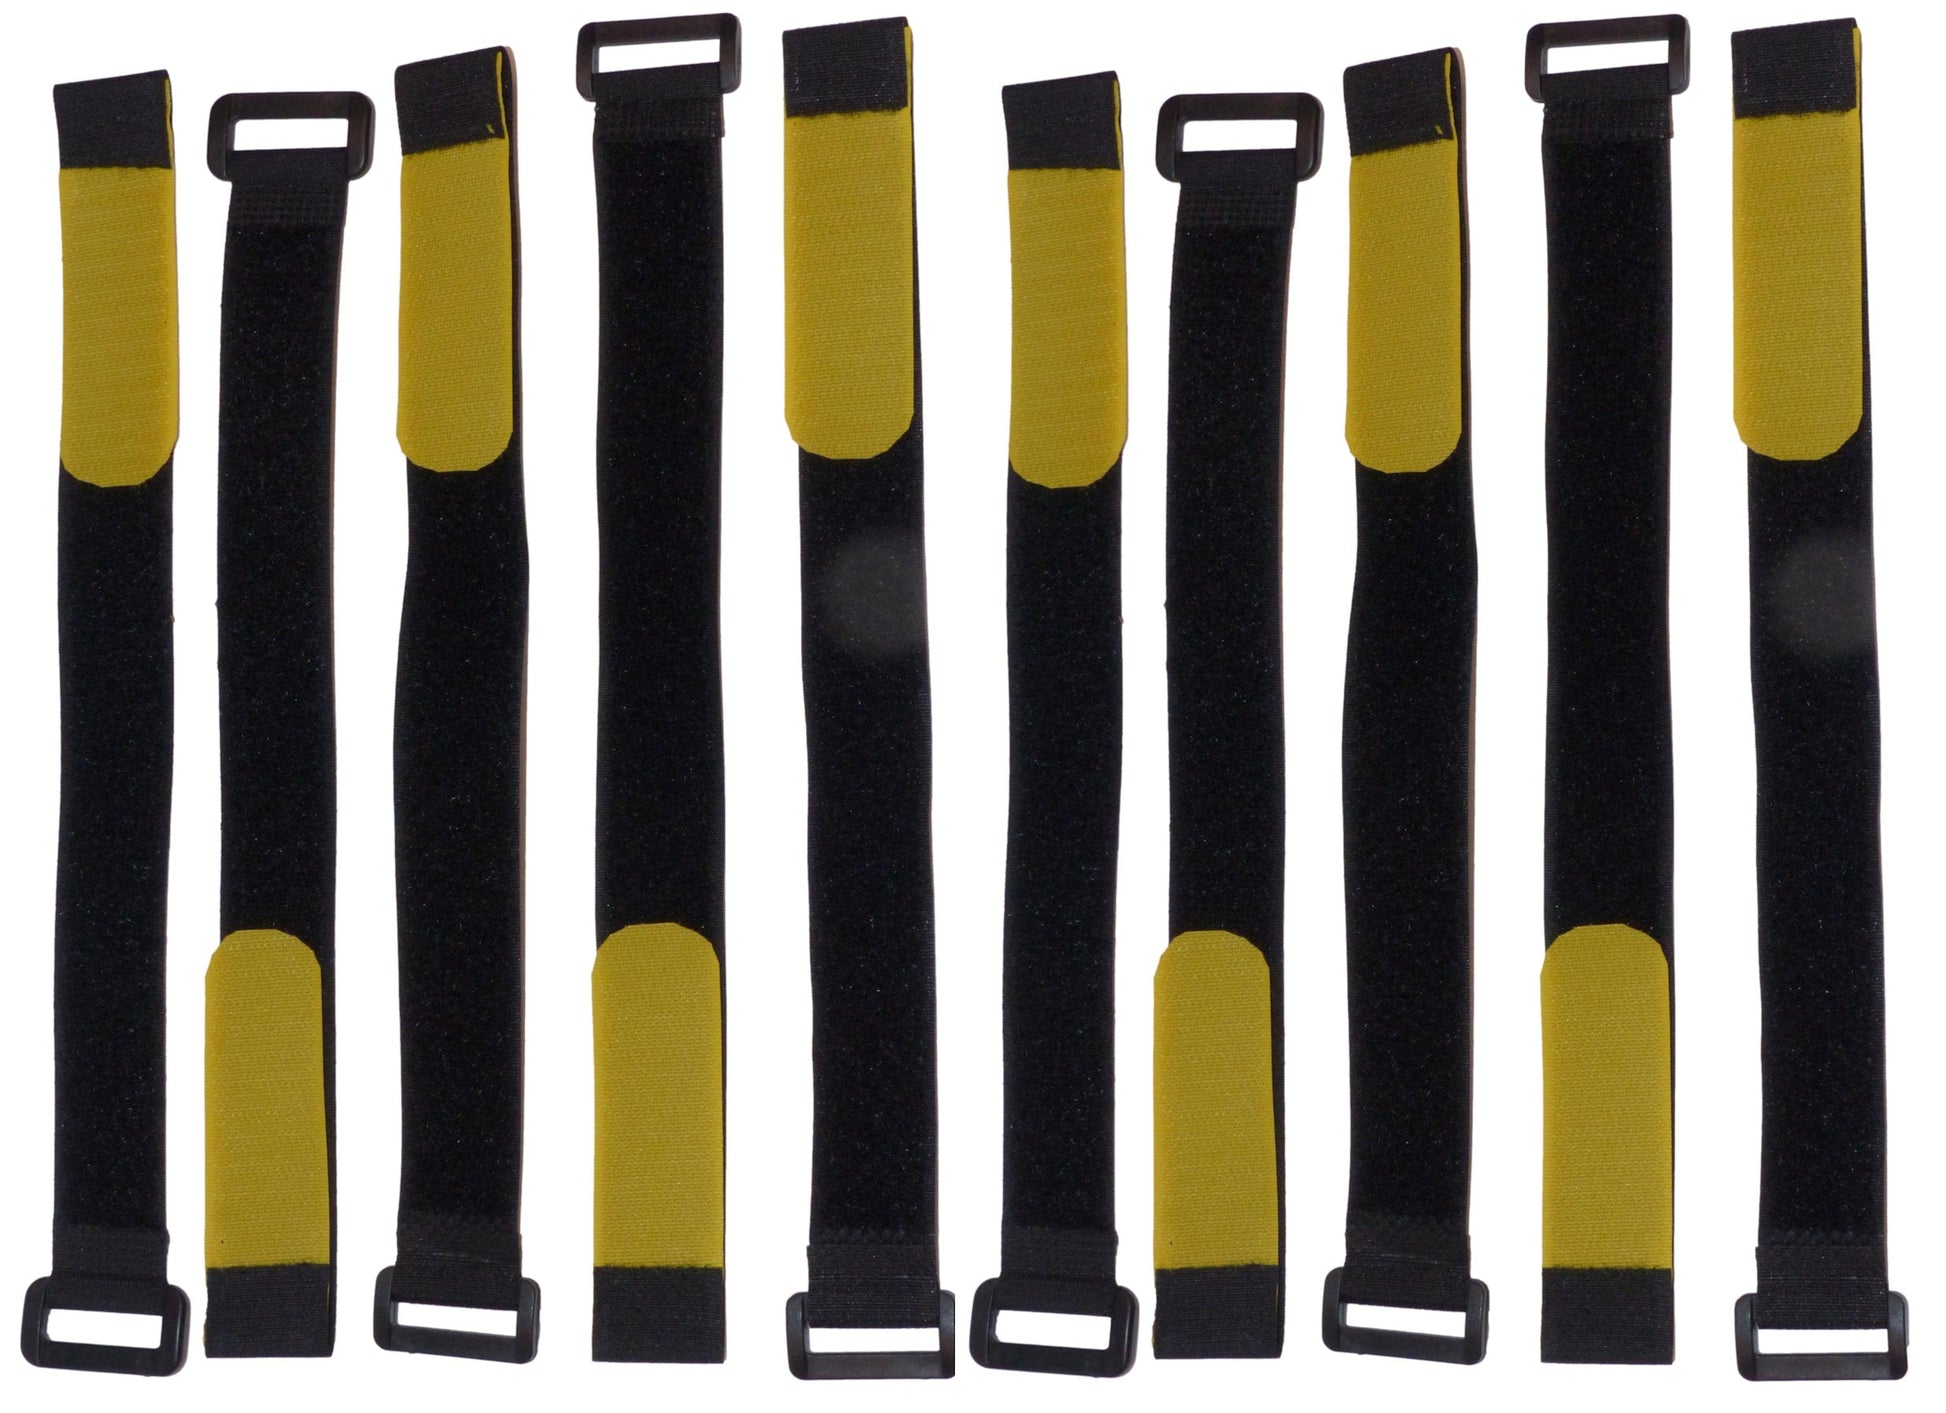 10 Pack 25mm Hook & Loop Adjustable Cinch Straps with Buckles; Reusable Cable Tidy Ties Wire Management - Cable Organiser System; Versatile for Indoor/Outdoor Use in Black, Yellow End 